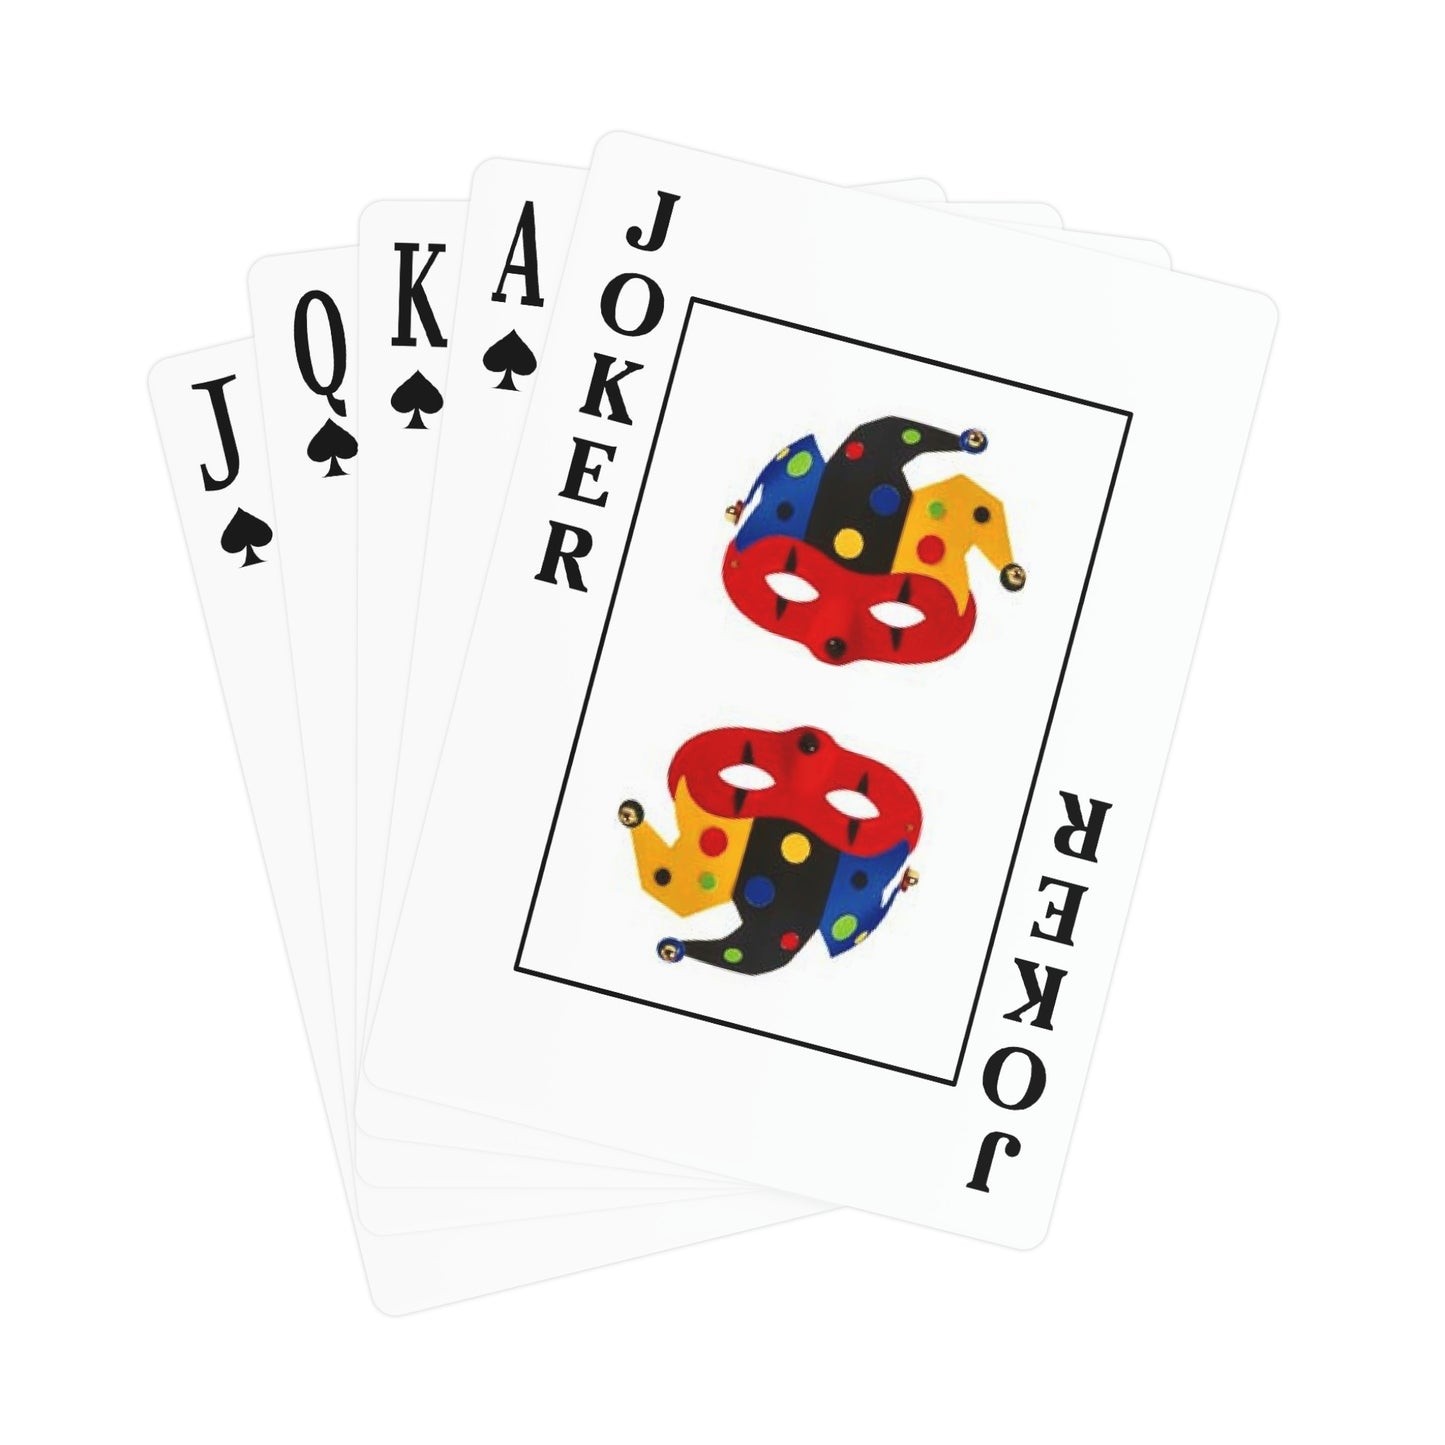 Dolly - Playing Cards